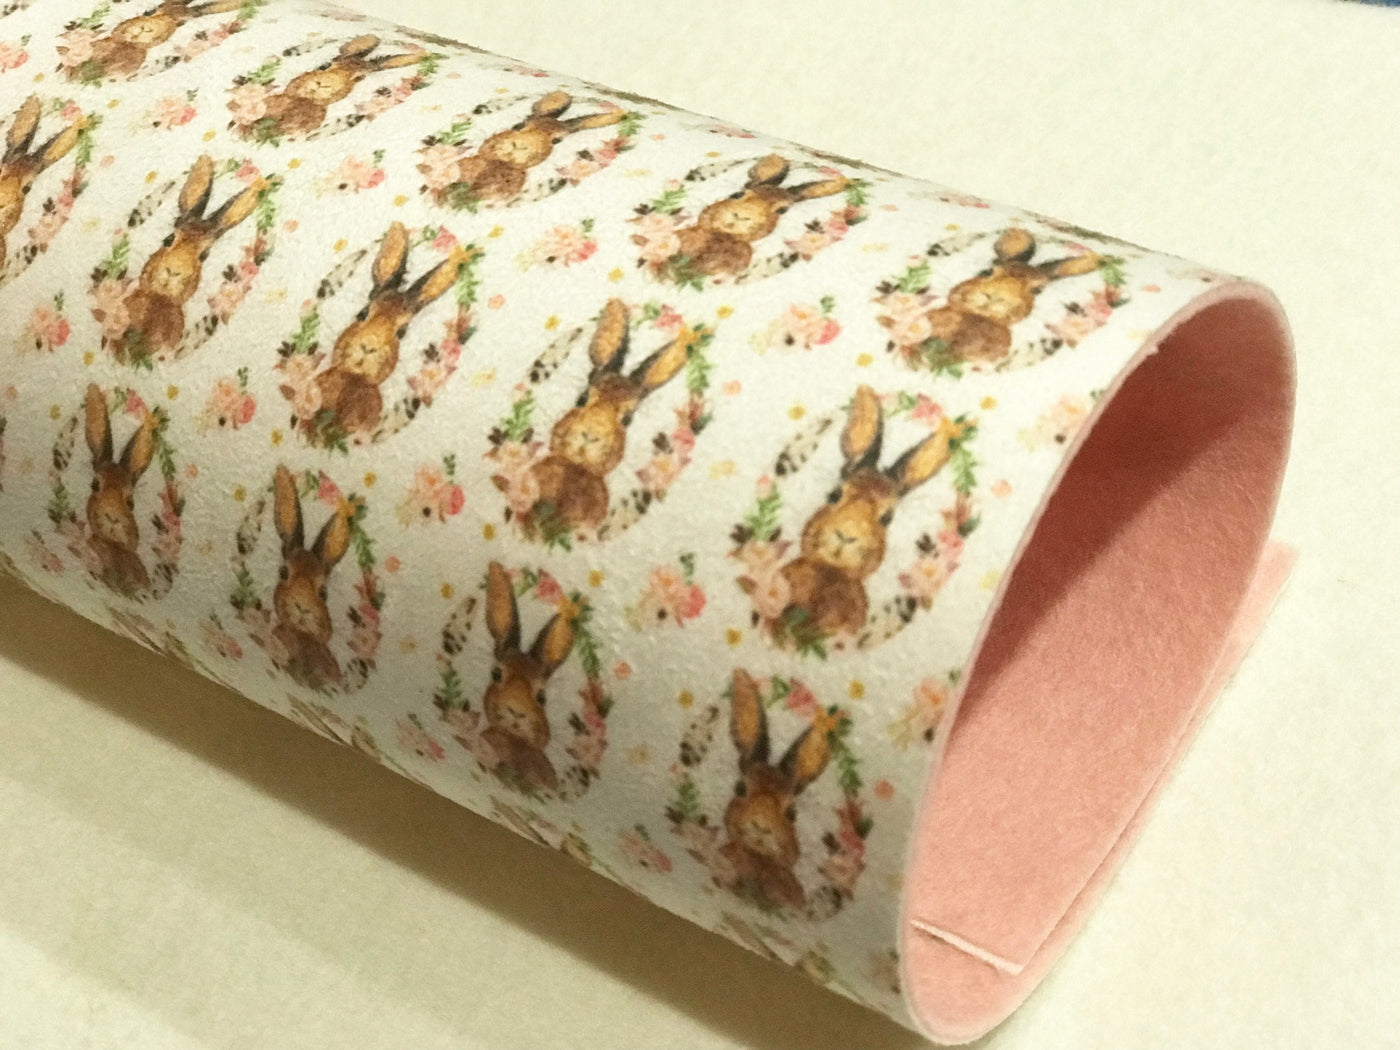 Some Bunny Loves Me 1" Faux Suede Wool Felt backed Fabric Sheets  - Made to Order / Pre Order